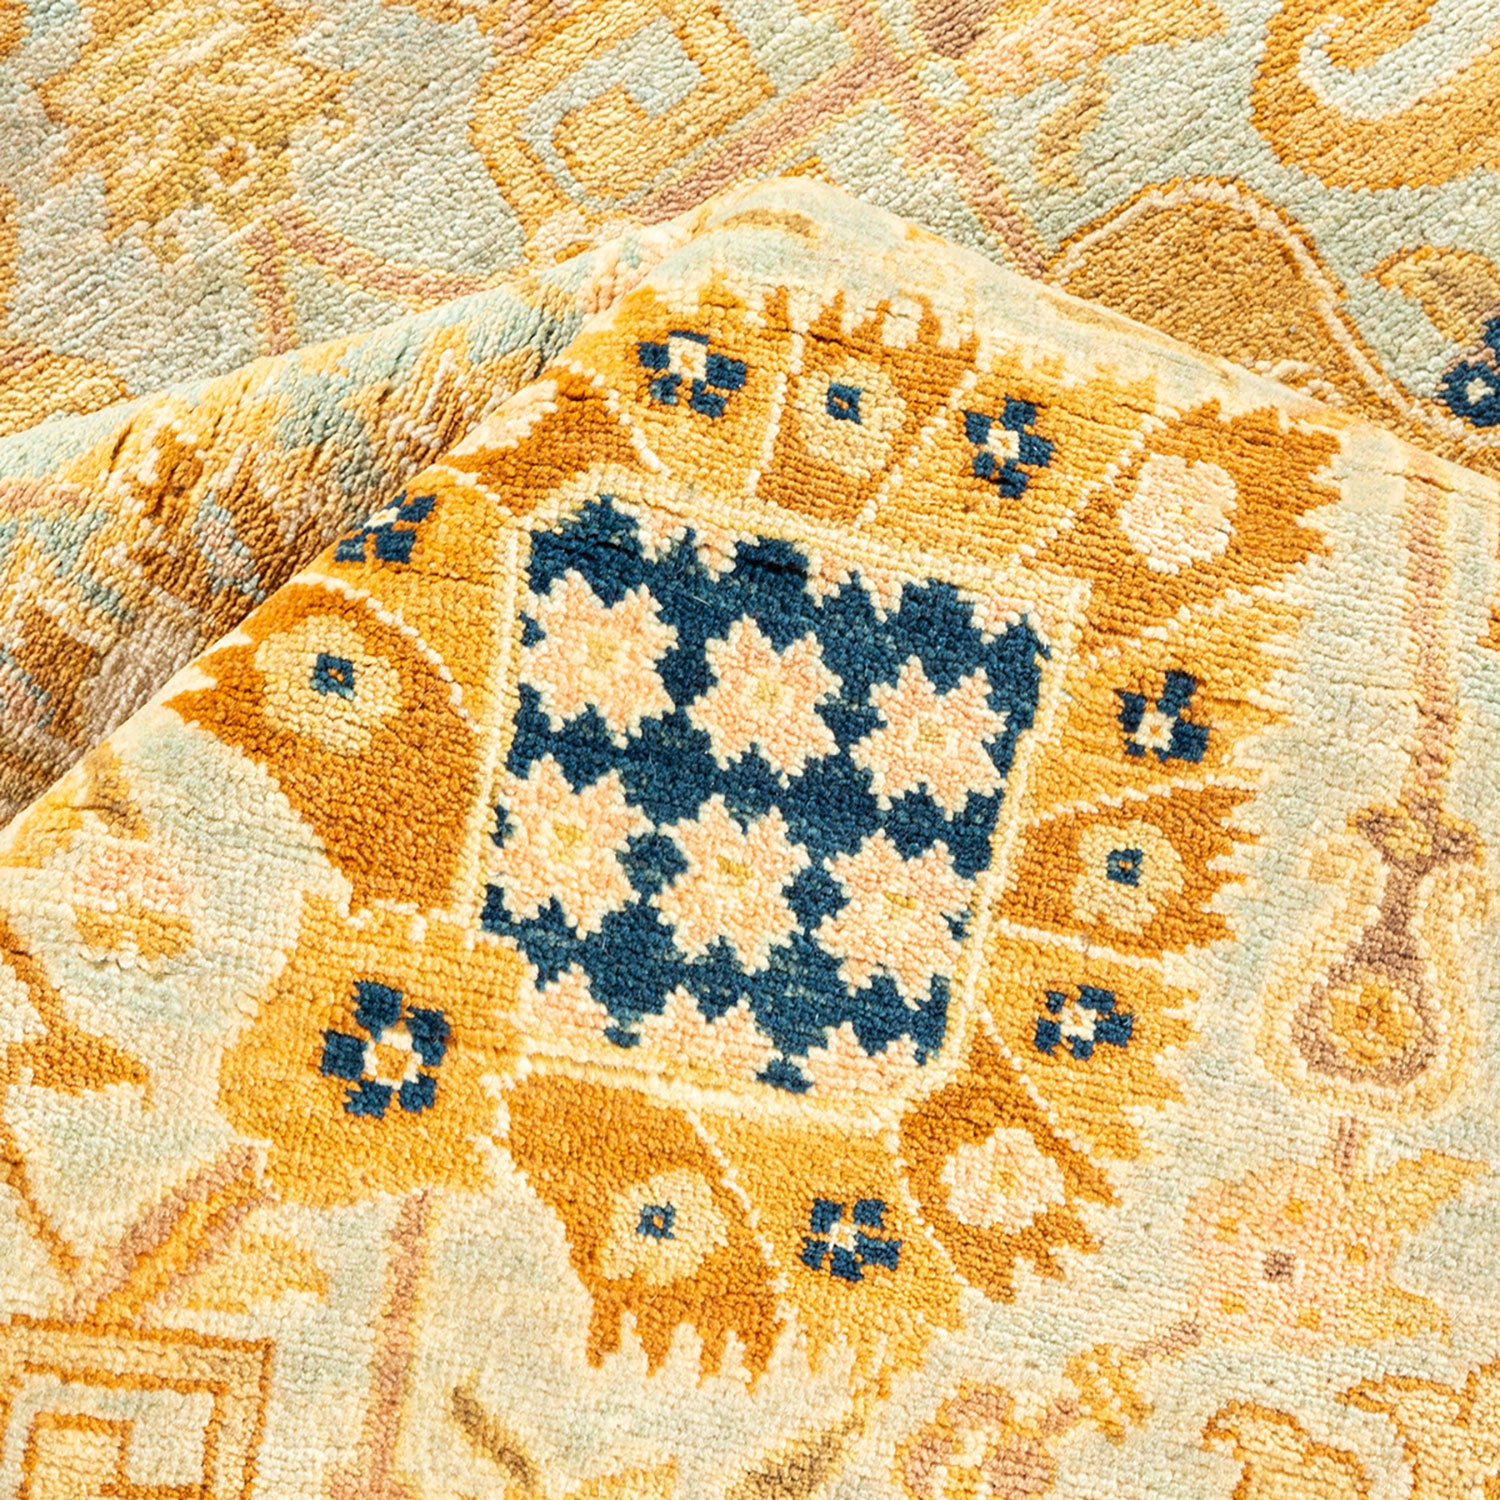 Close-up of a patterned rug with intricate designs in blue and orange.